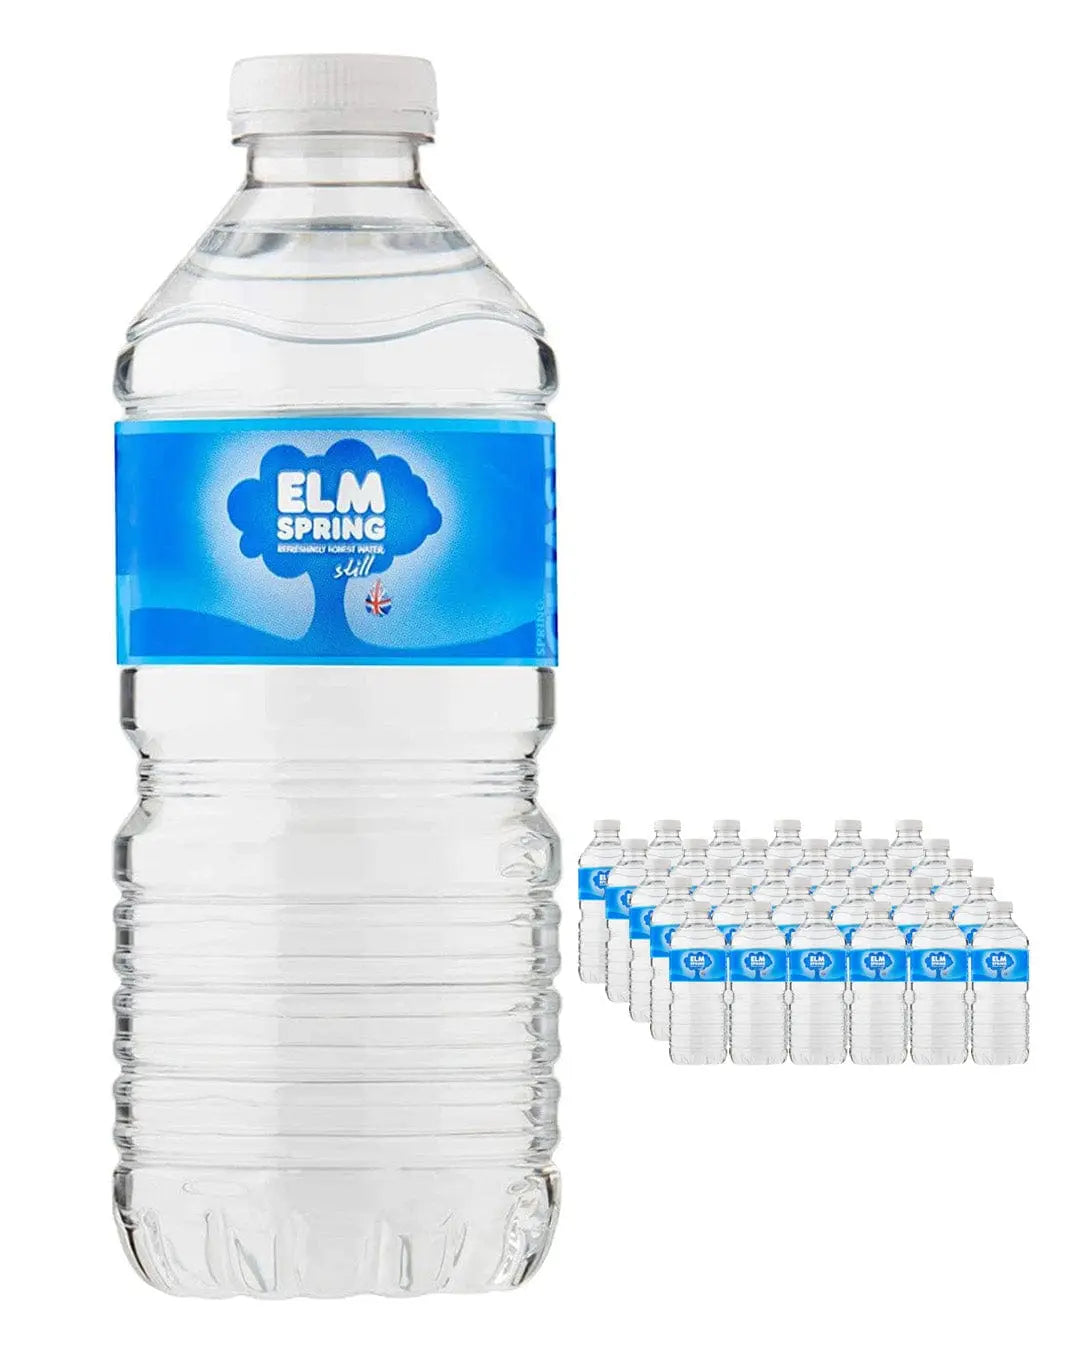 Elm Spring Still Mineral Water Multipack, 24 x 330 ml Water